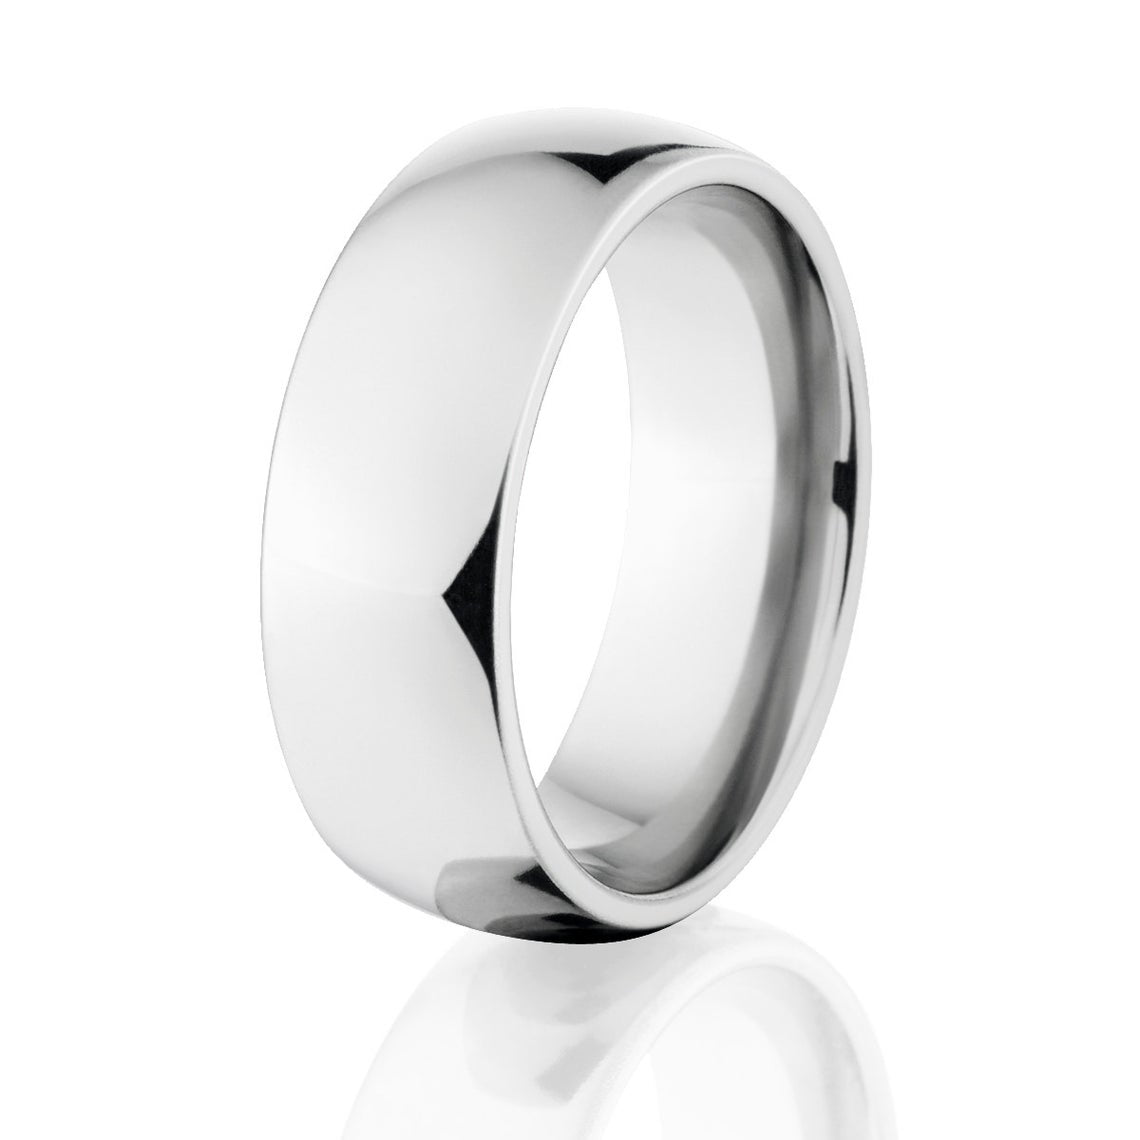 8mm wide cobalt wedding band with a polish finish